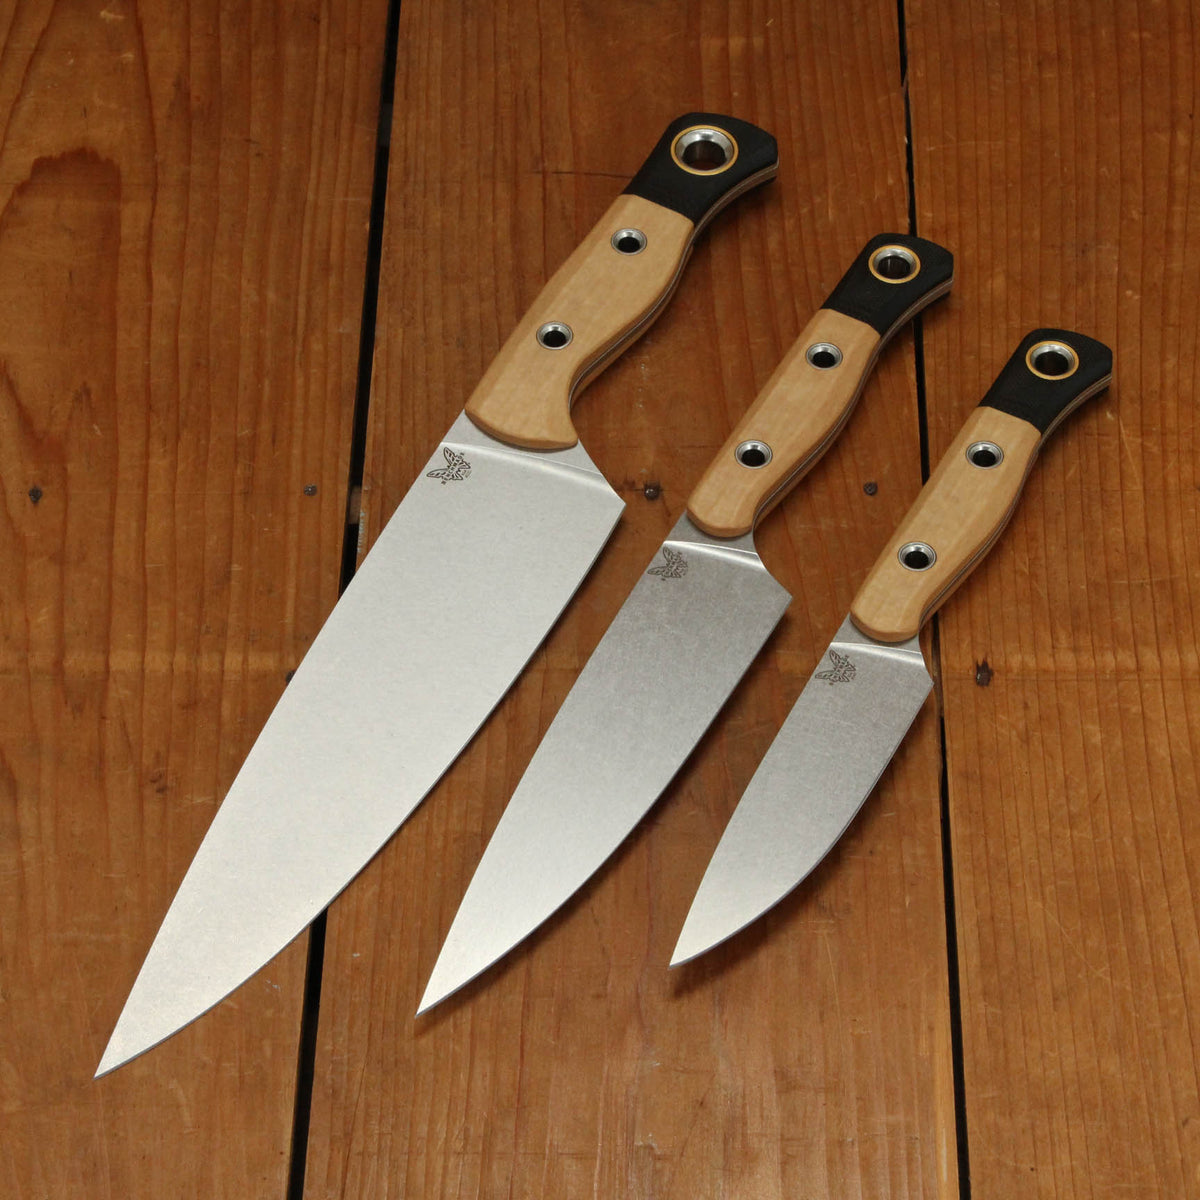 Benchmade Cutlery Drop Point CPM-154 Fixed Blade Maple Valley Richlite Handle Knife Set - 3 Pieces